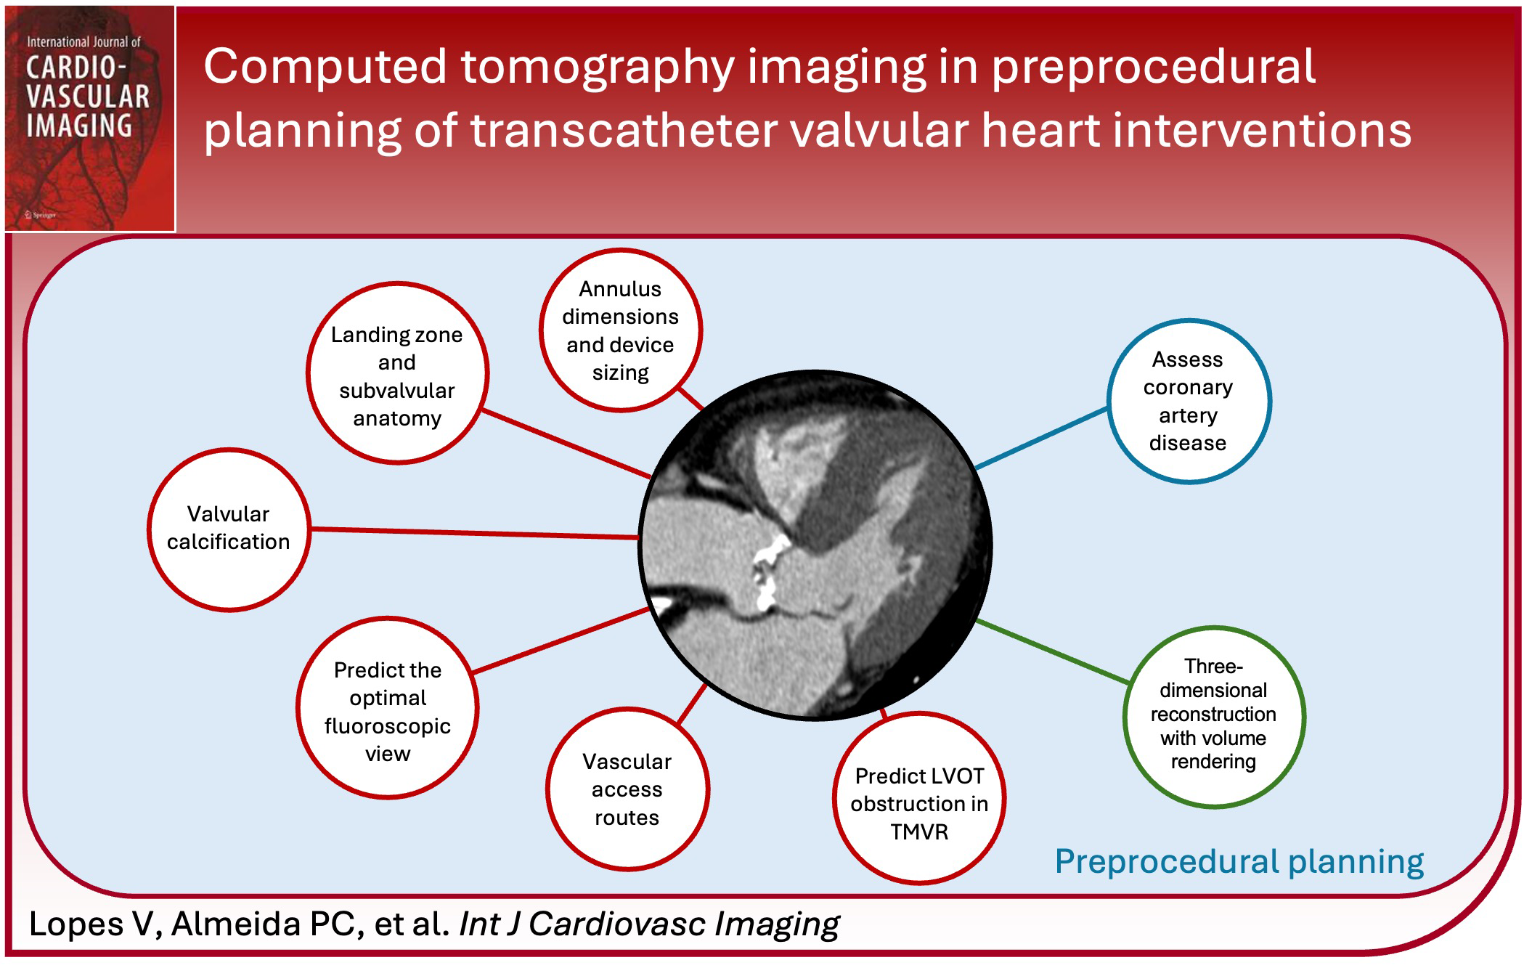 Computed tomography imaging in preprocedural planning of transcatheter valvular heart interventions